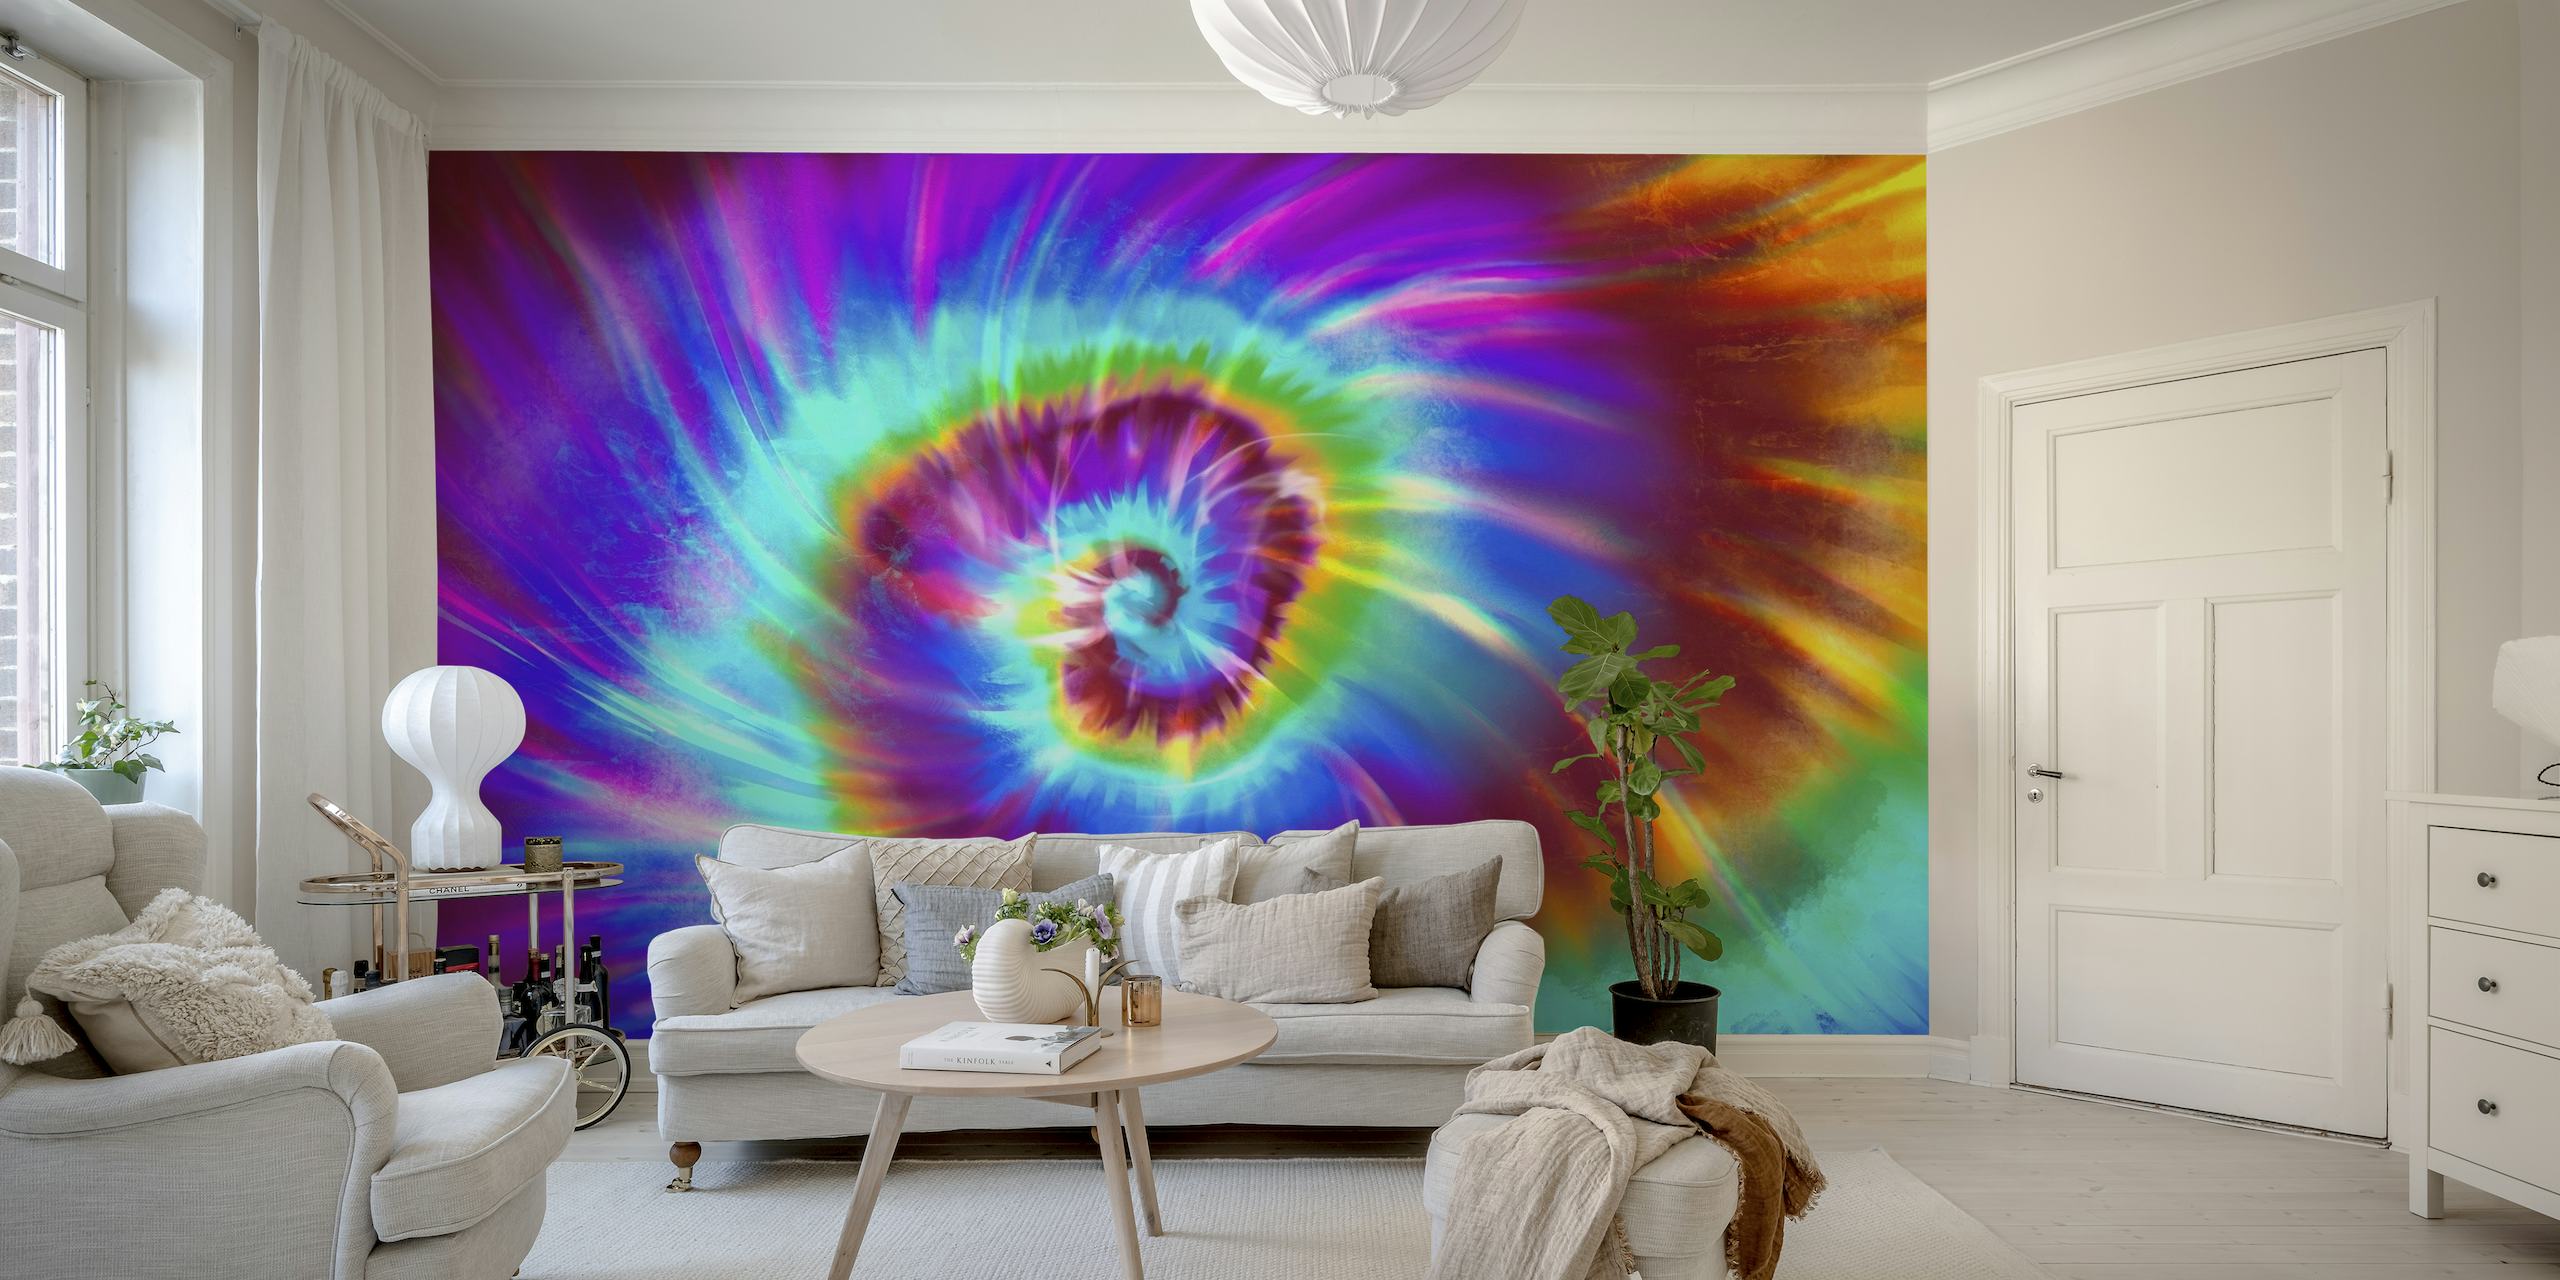 Colorful seventies-style hippie psychedelic wall mural with vibrant swirls and bold colors